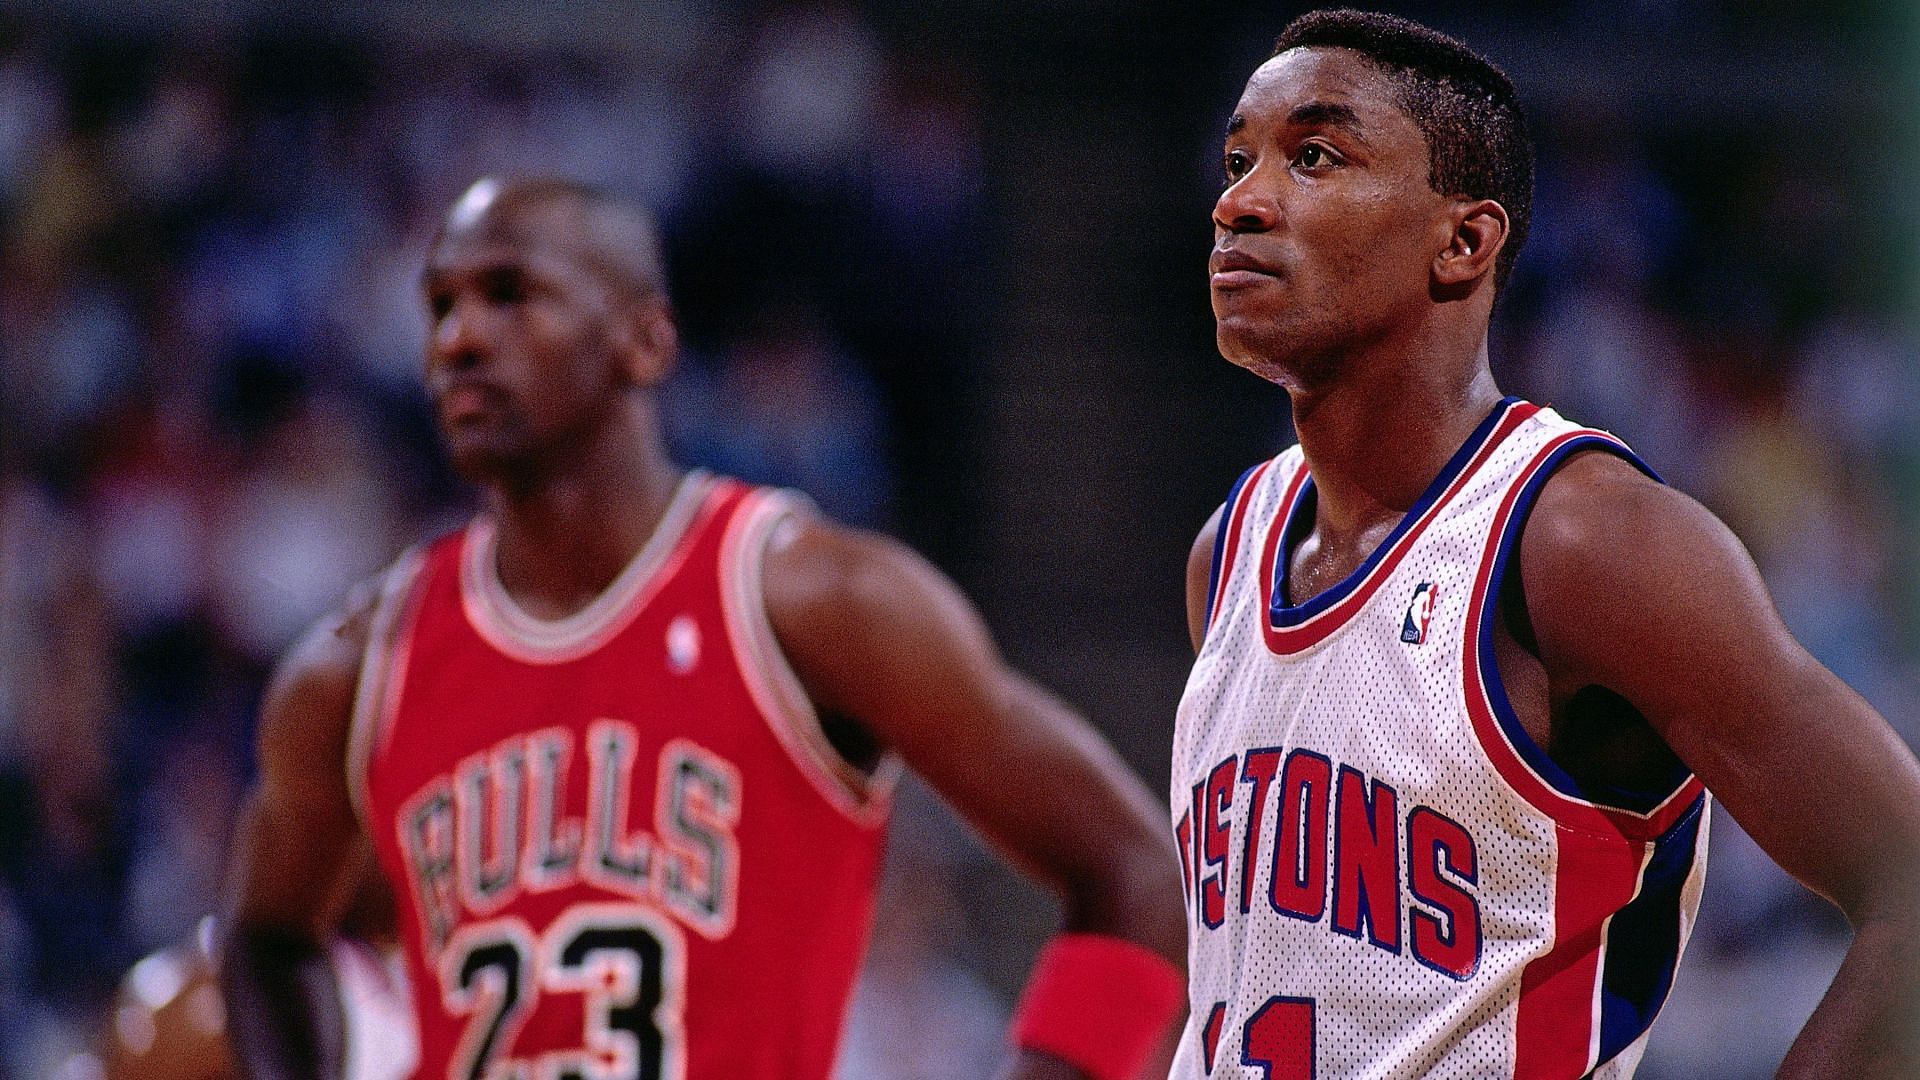 Isiah Thomas and Michael Jordan in action [Source The Undefeated]